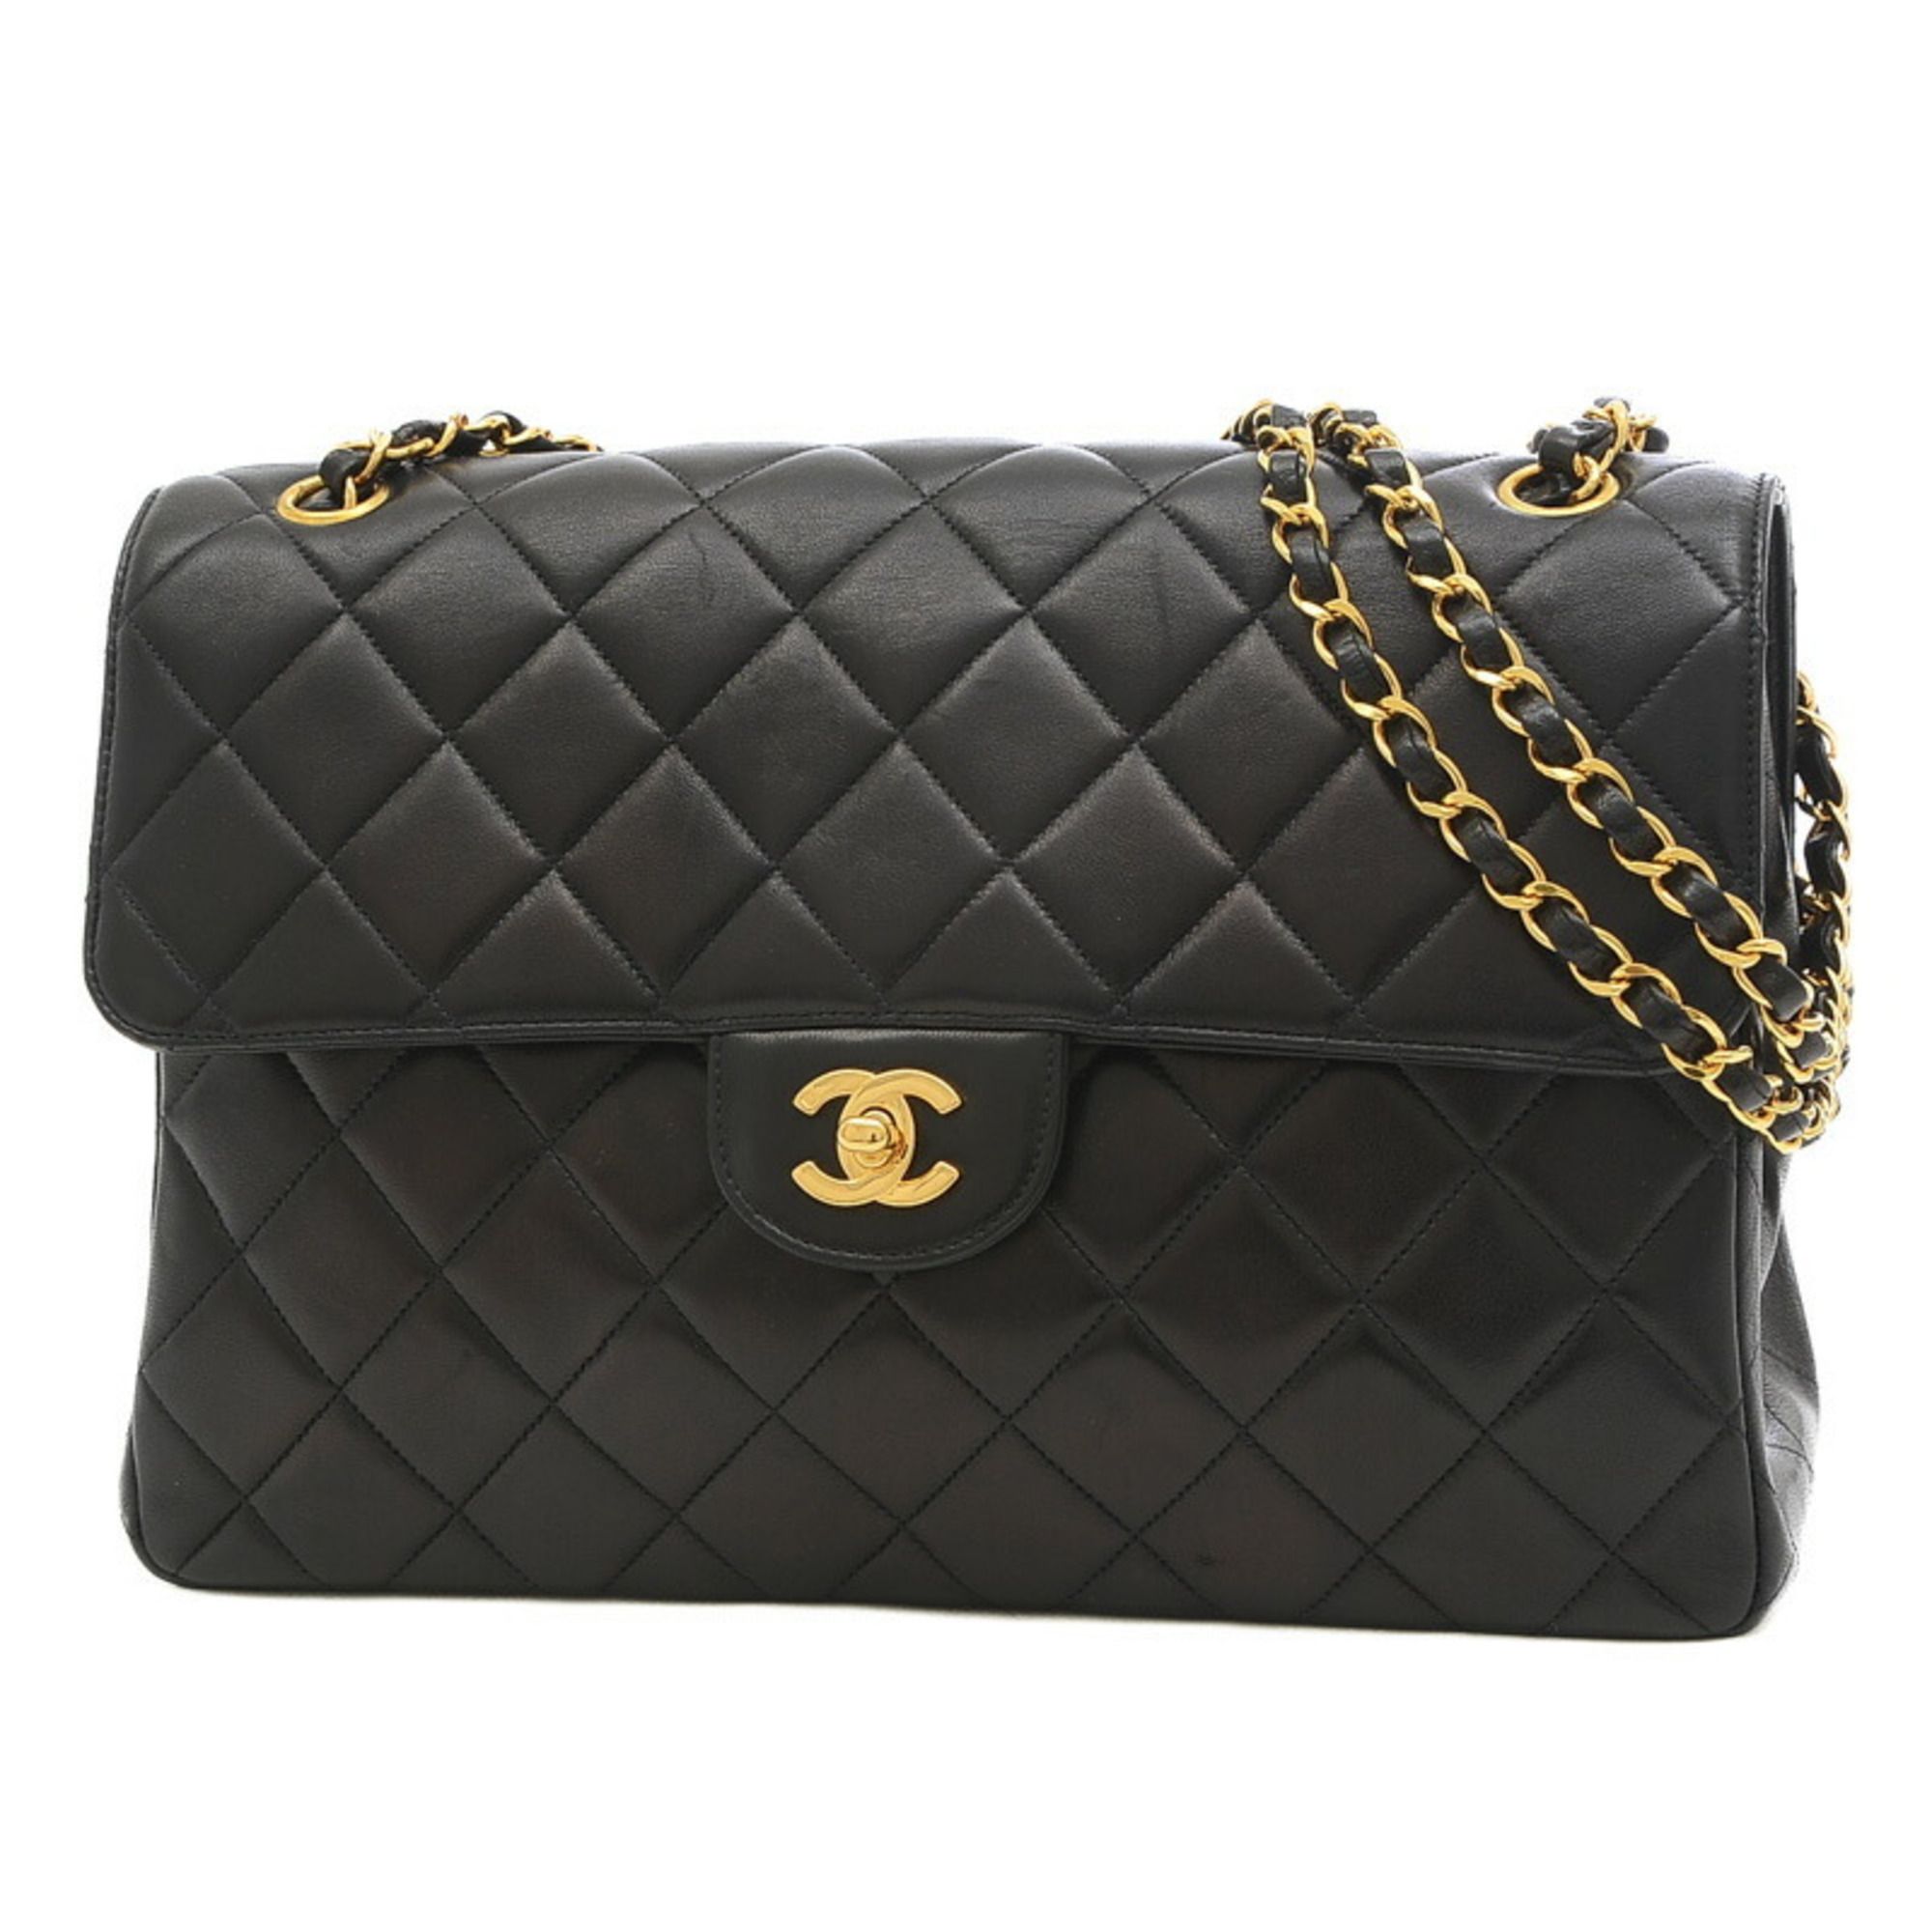 Chanel Chanel W Face Matelasse Double Sided Flap Chain Shoulder